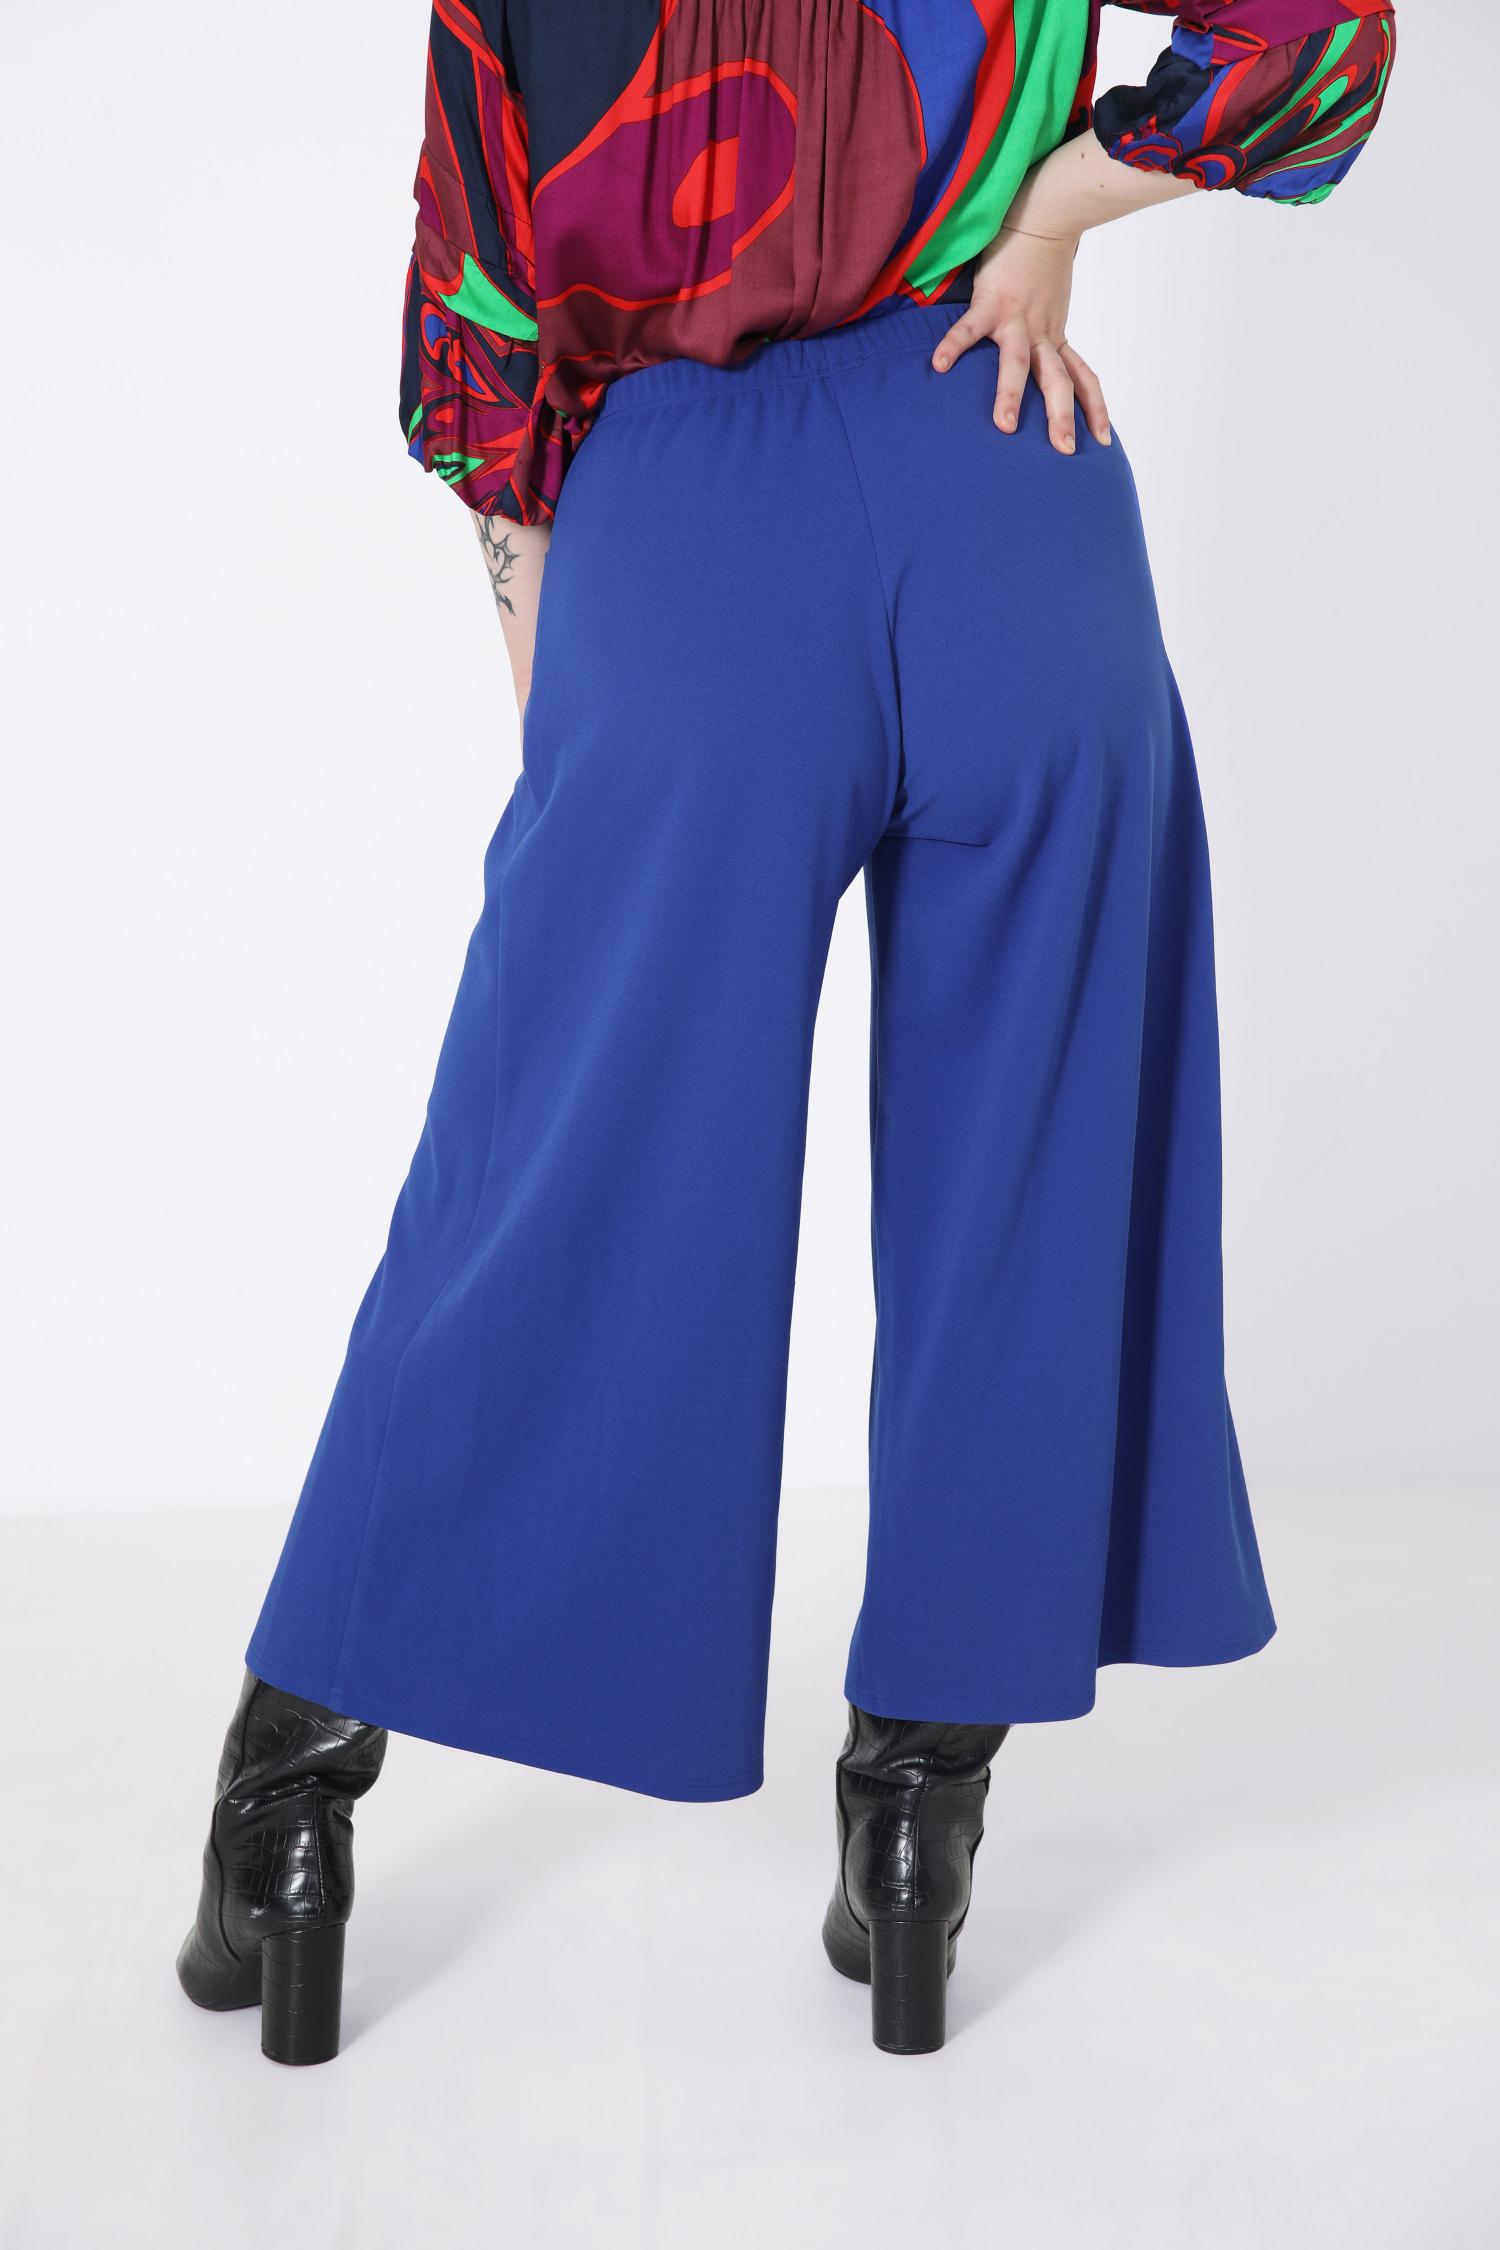 Plain 7/8 pants with slit at the bottom